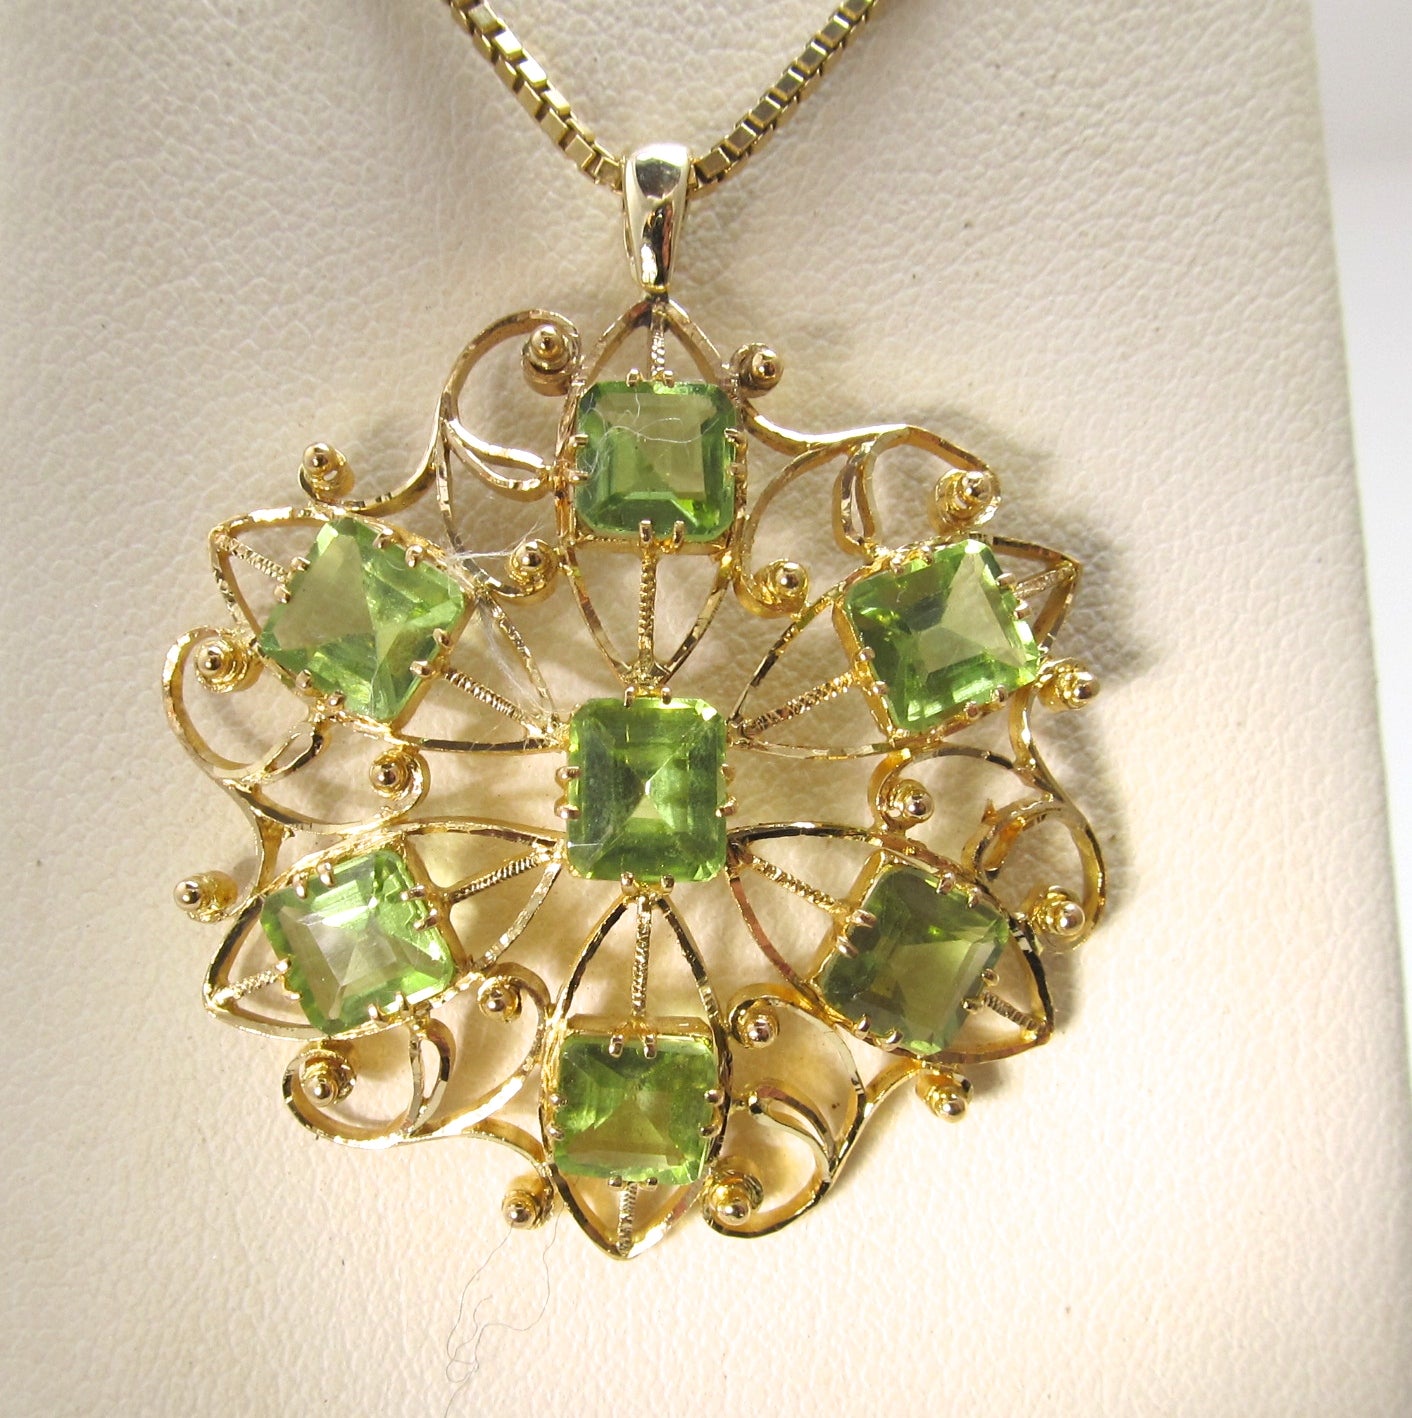 Vintage peridot necklace, 14k yellow gold